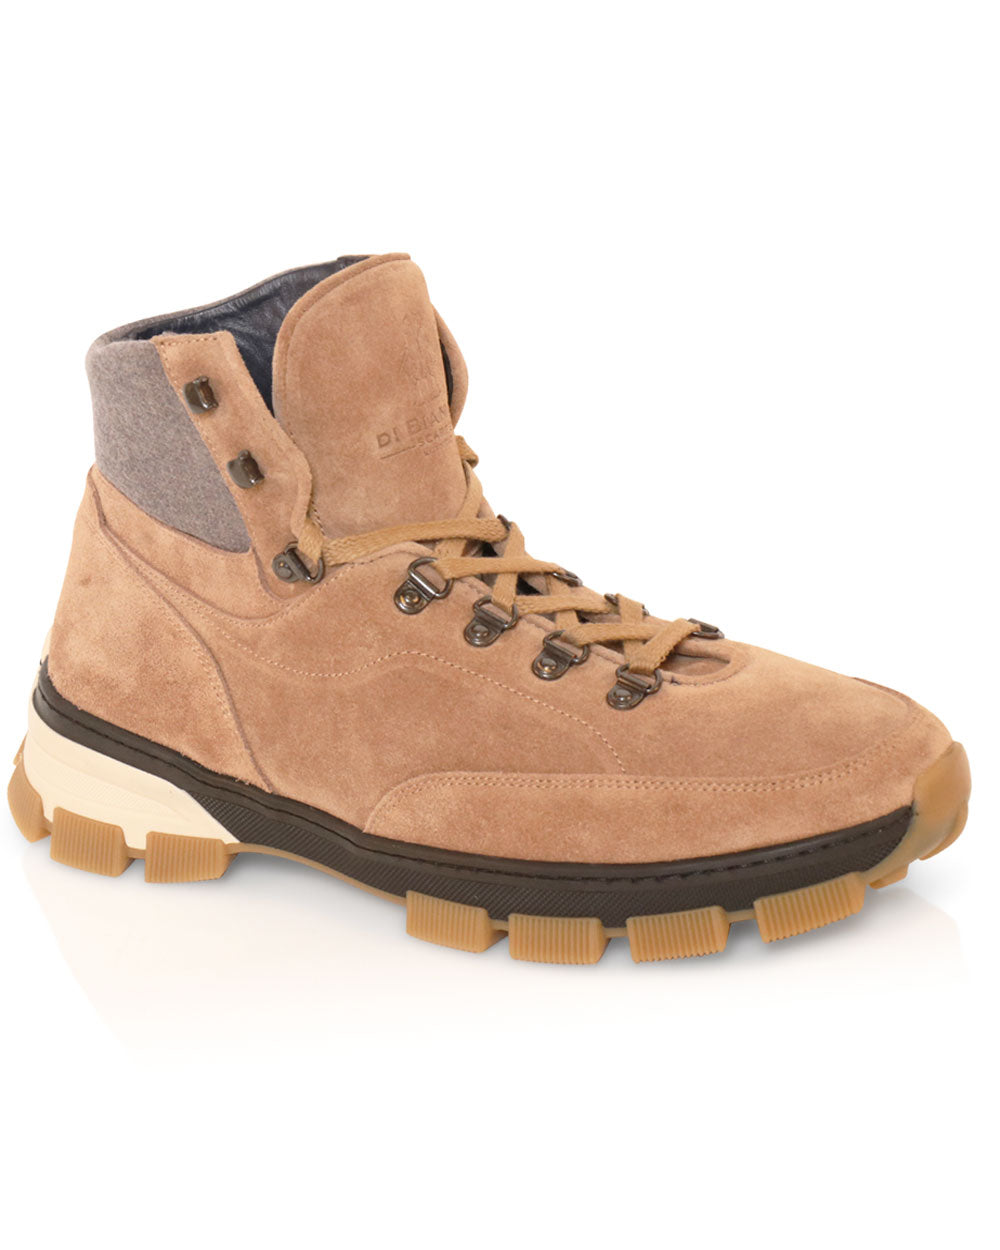 Antelope Livigno Boot in Taupe